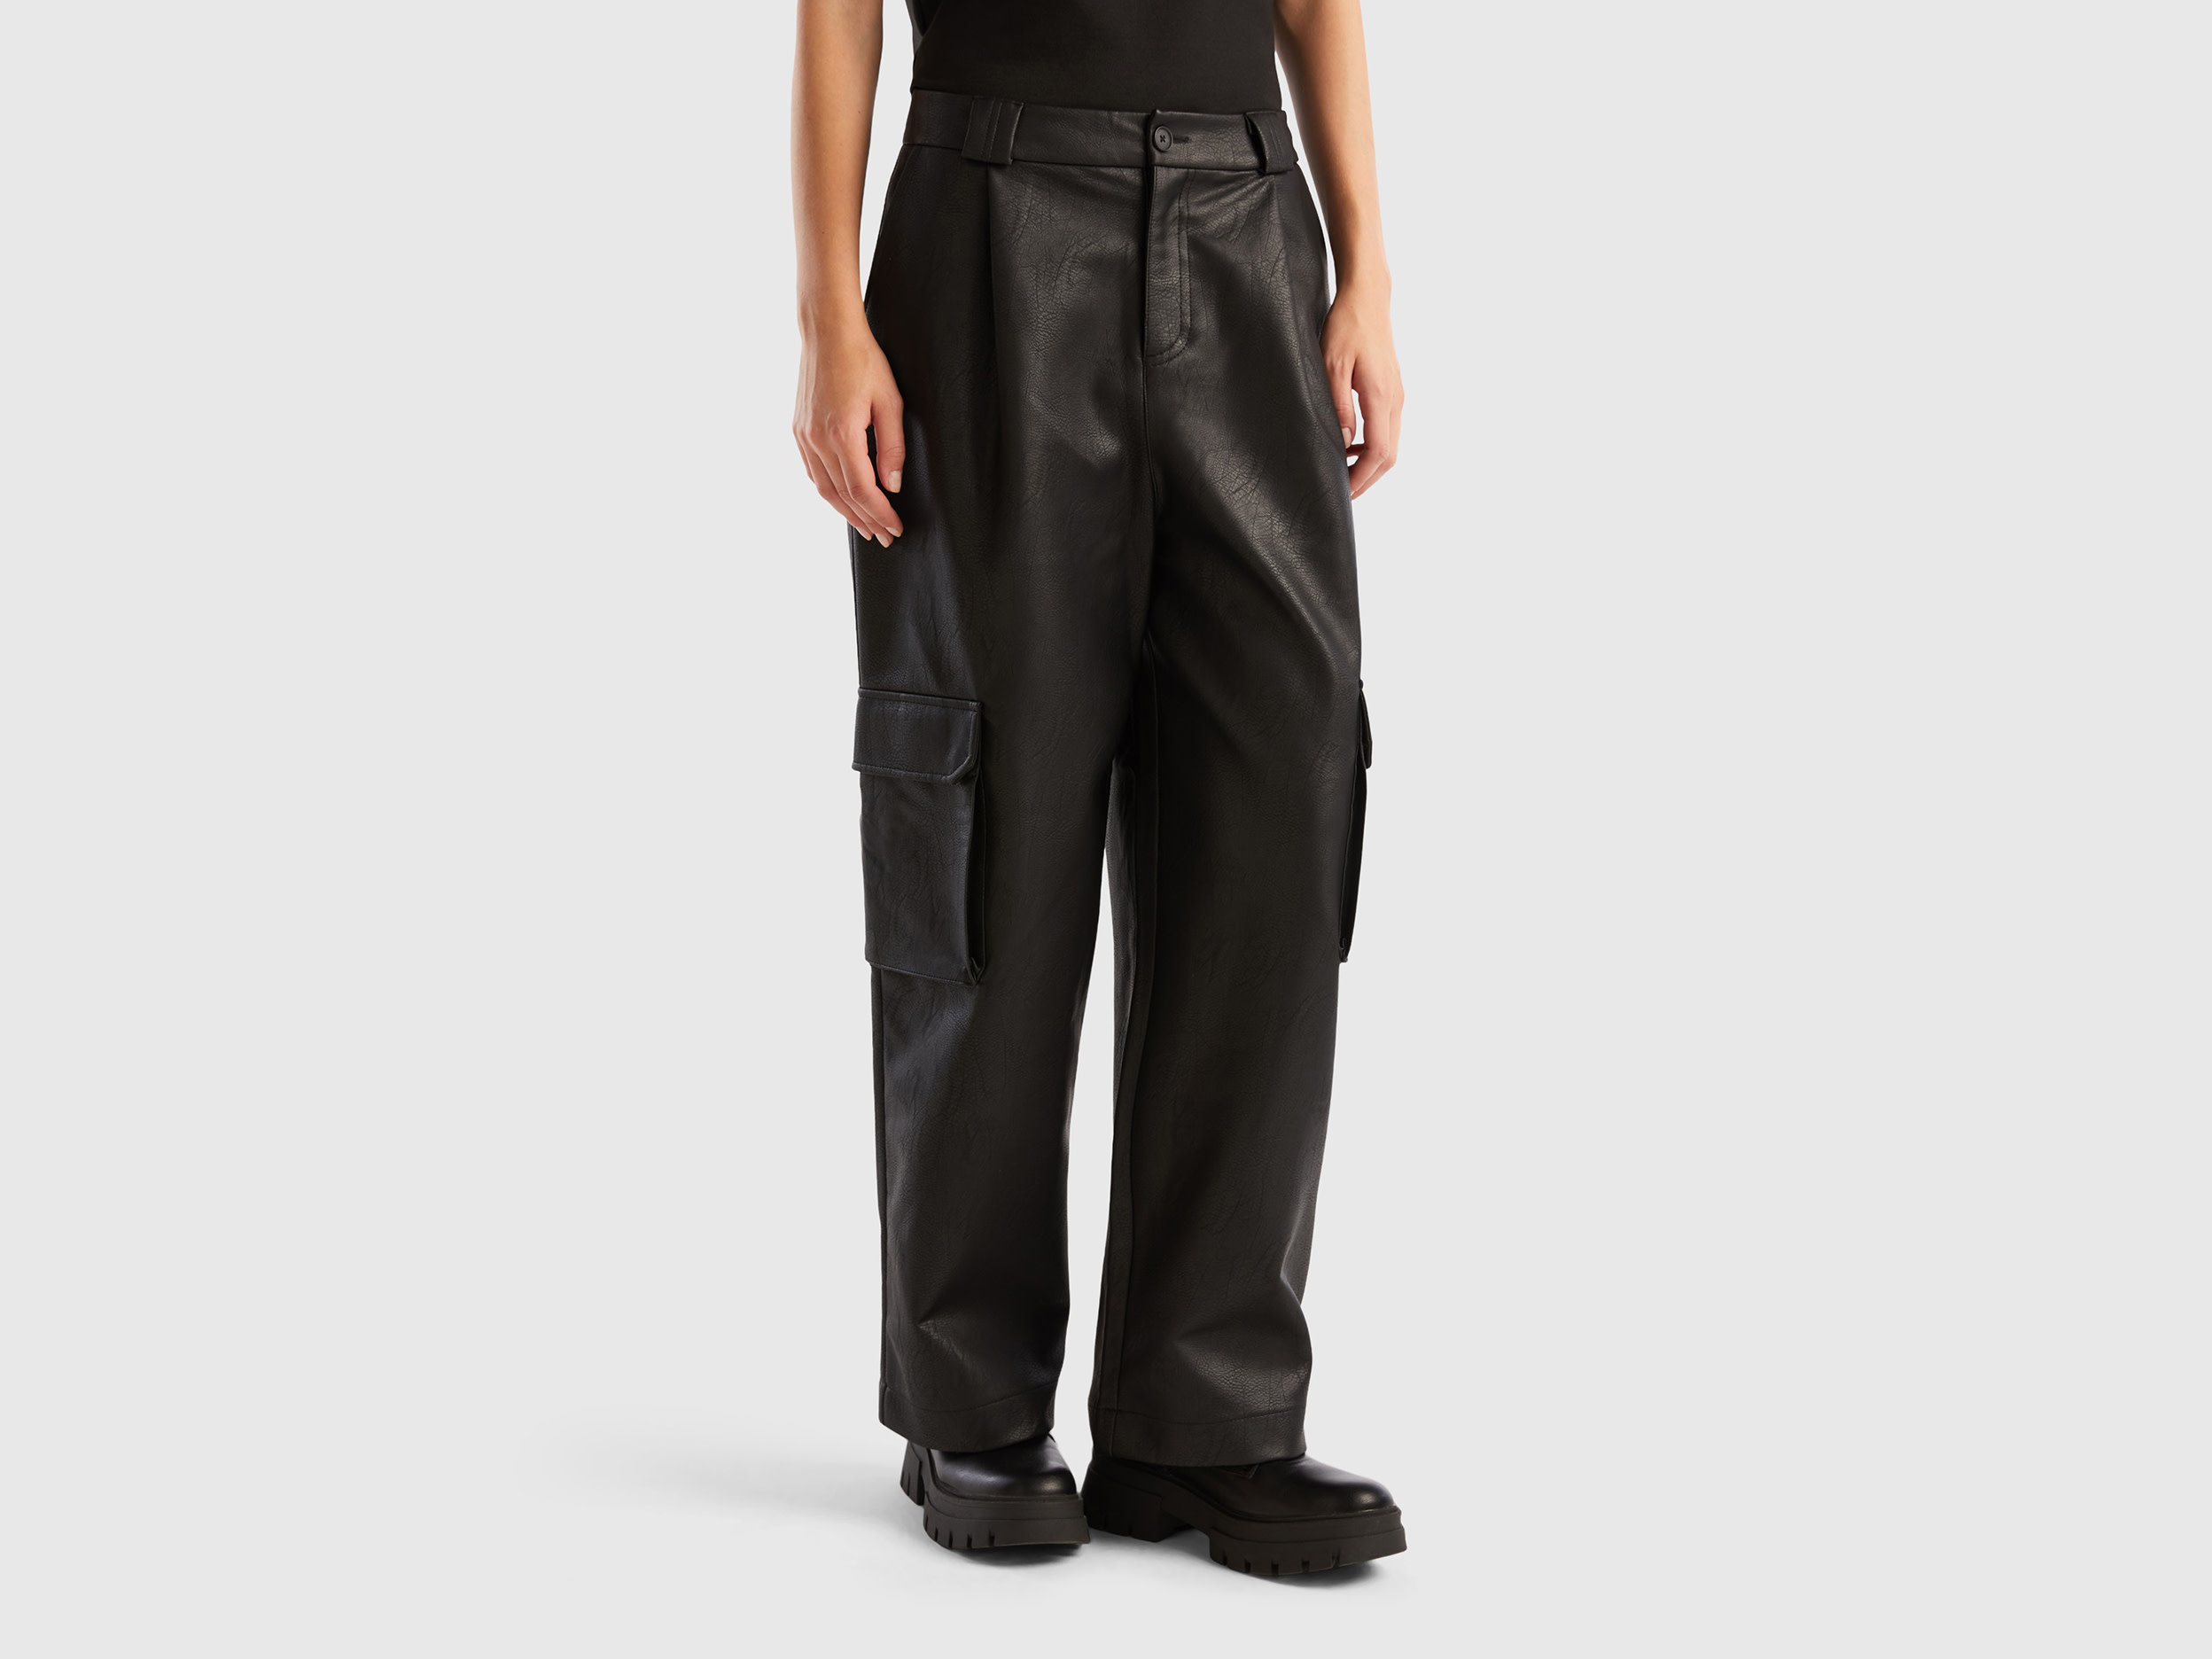 Benetton, Cargo Trousers In Imitation Leather Fabric, size 8, Black, Women